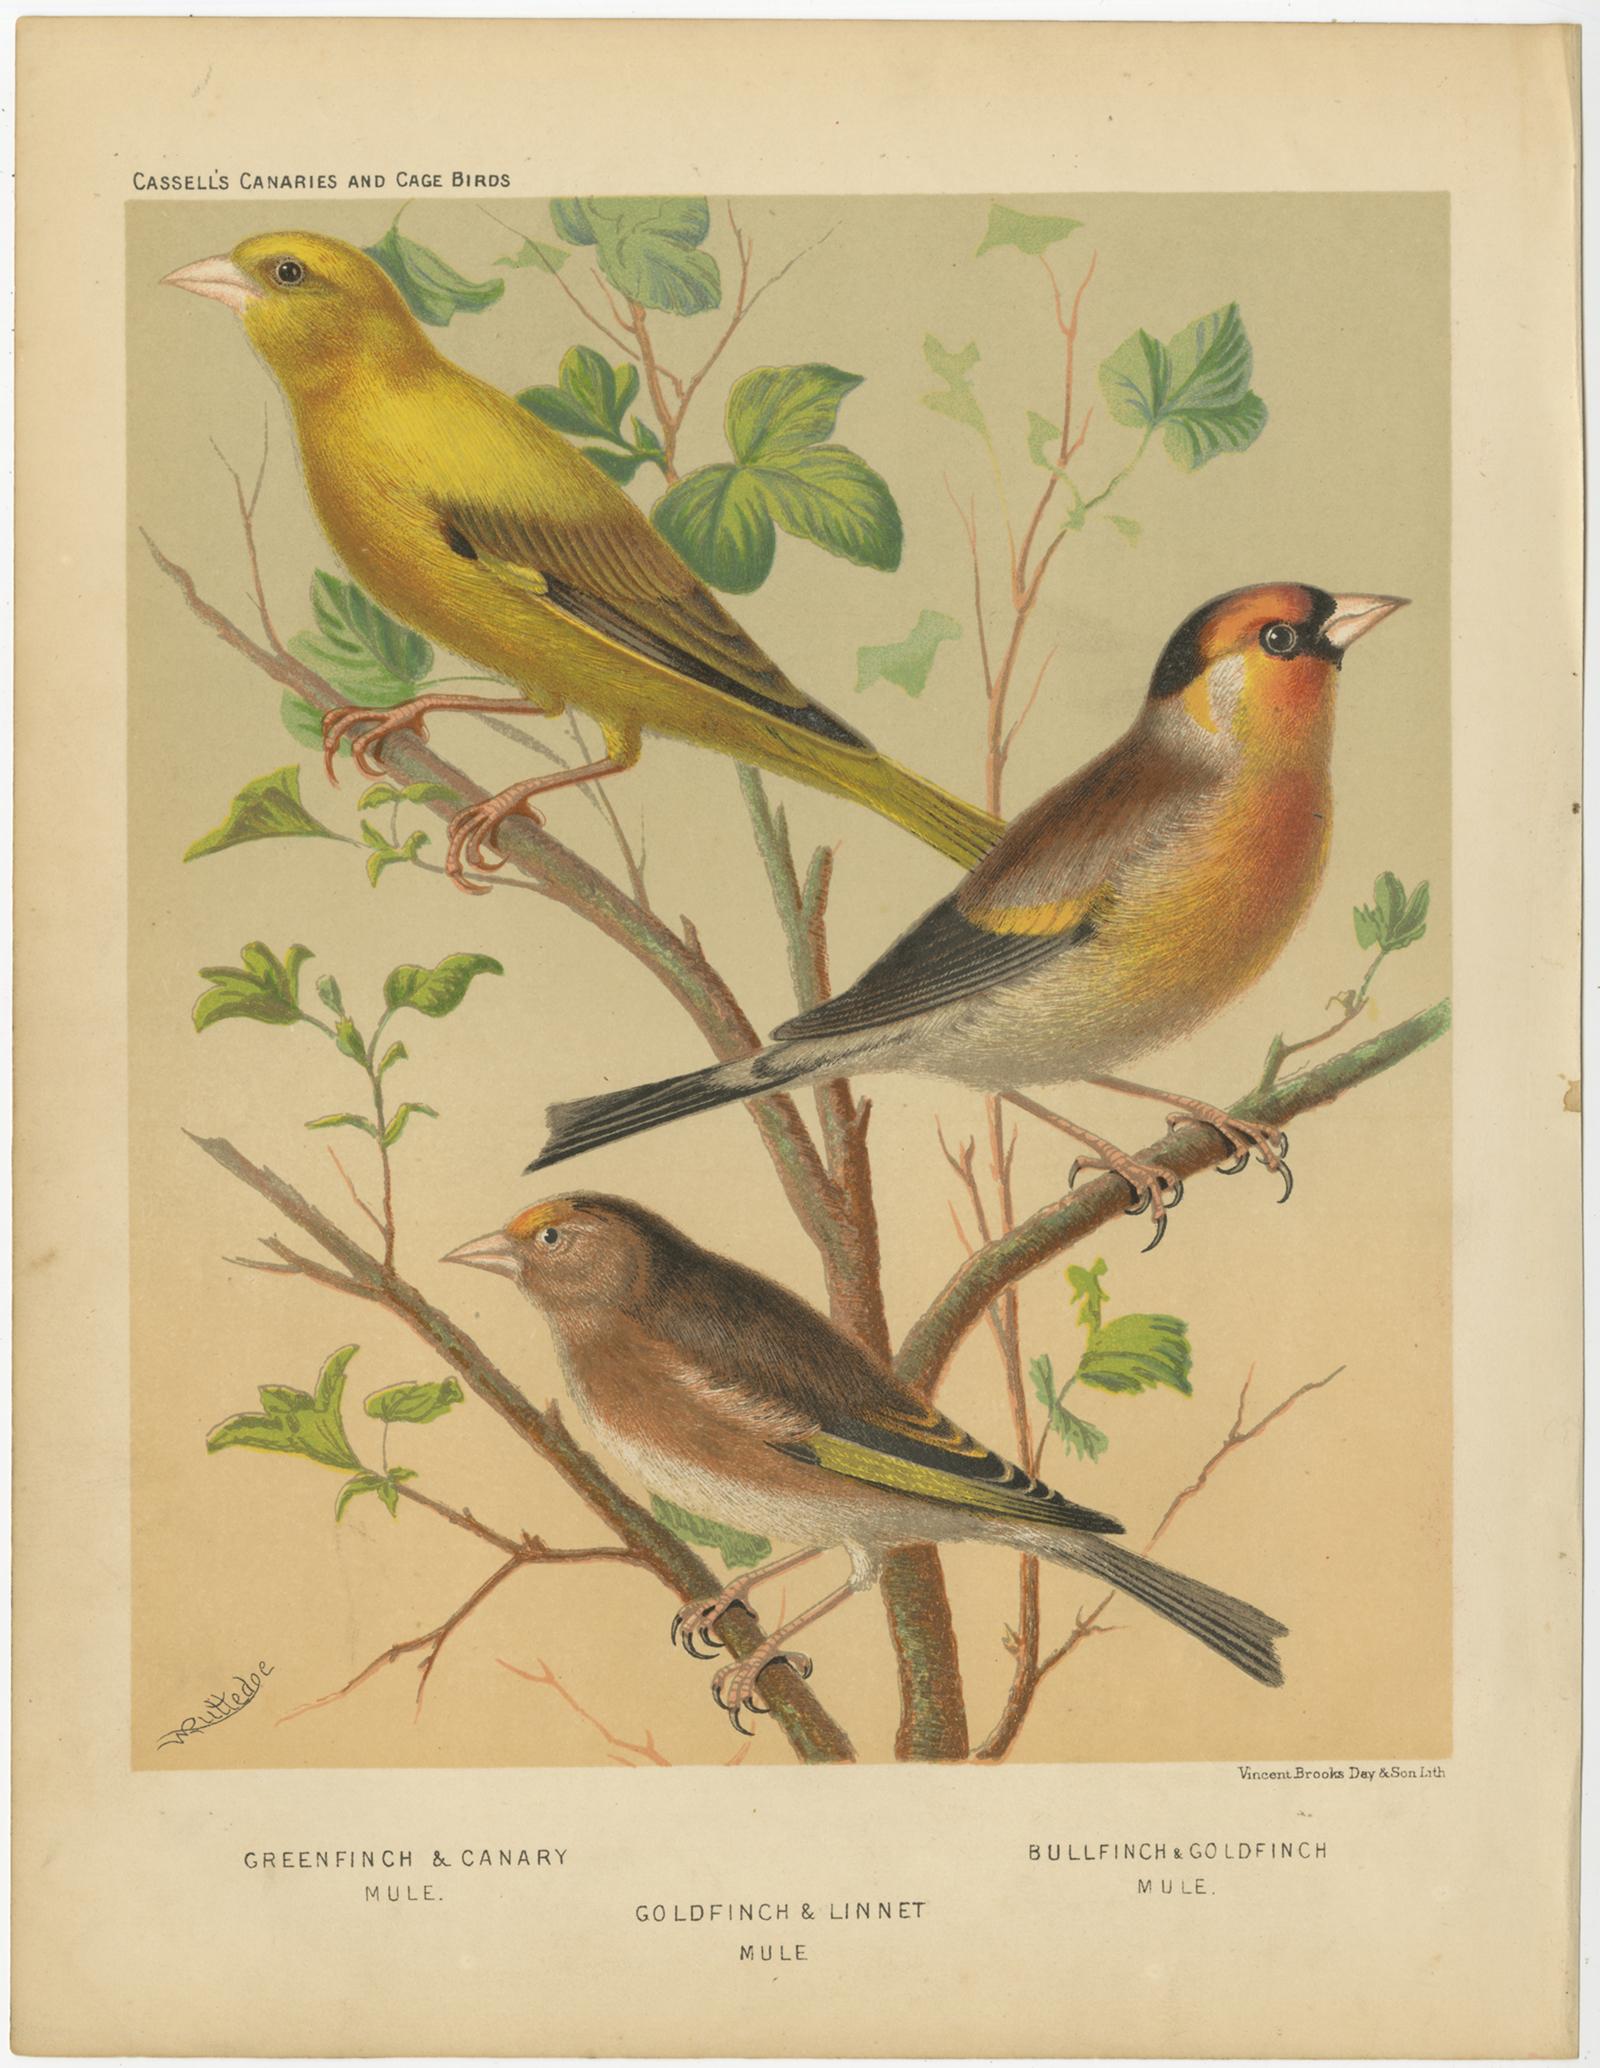 Antique bird print titled '1. Greenfinch & Canary Mule. 2. Goldfinch & Linnet Mule. 3. Bullfinch & Goldfinch Mule.' Old bird print depicting the Greenfinch & Canary Mule, Goldfinch & Linnet Mule, Bullfinch & Goldfinch Mule. This print originates